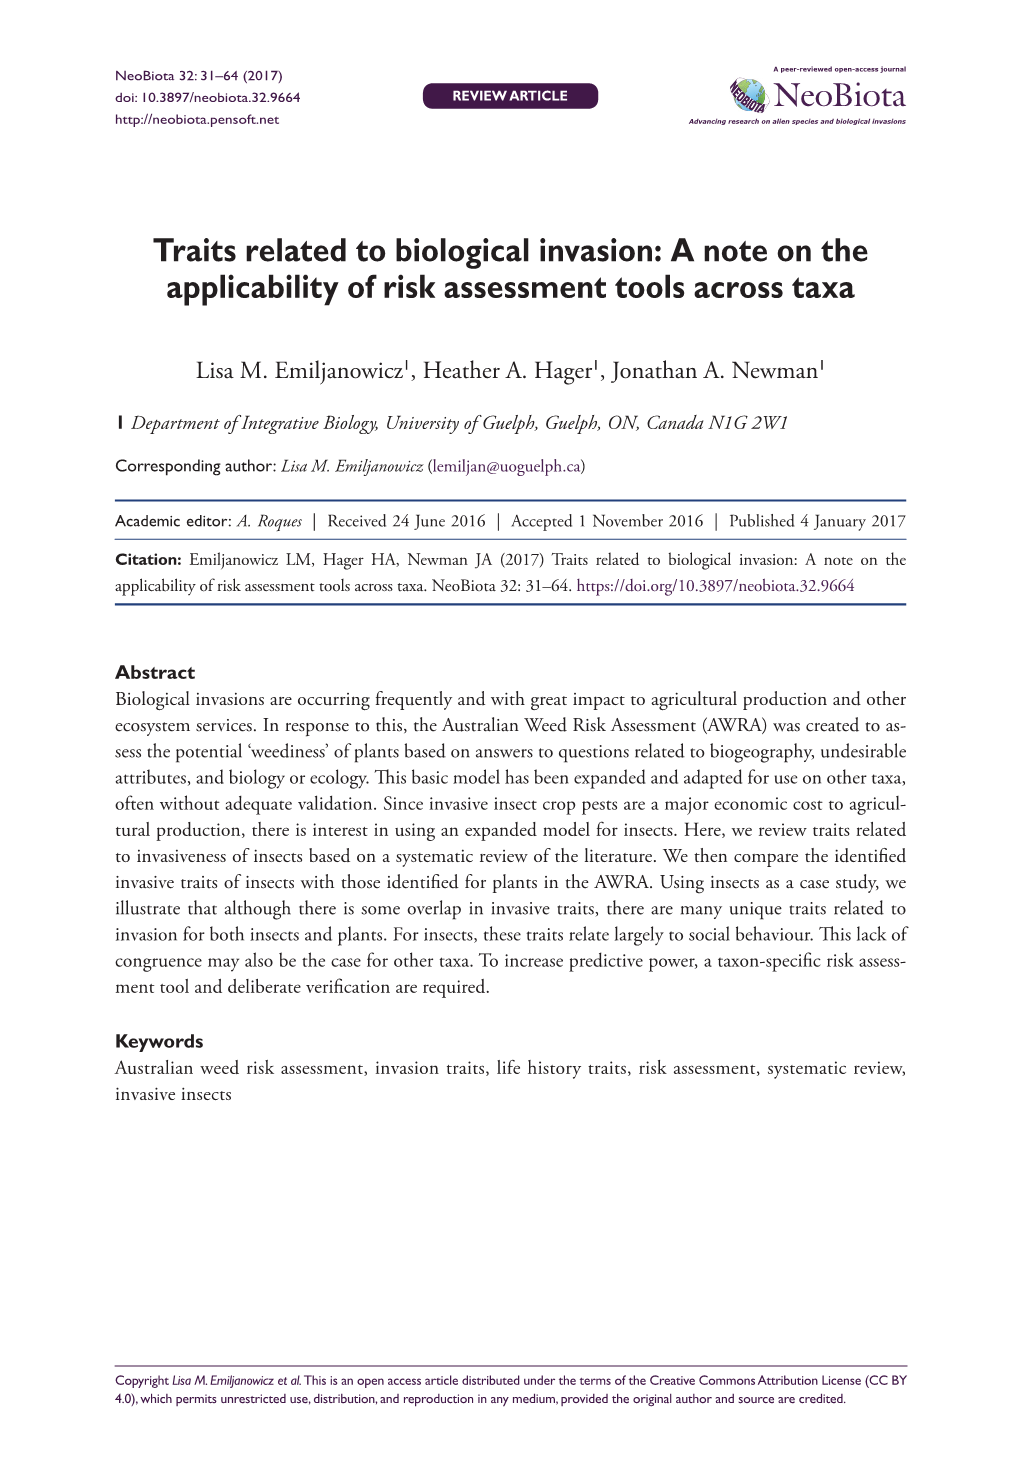 Traits Related to Biological Invasion: a Note on the Applicability of Risk Assessment Tools Across Taxa